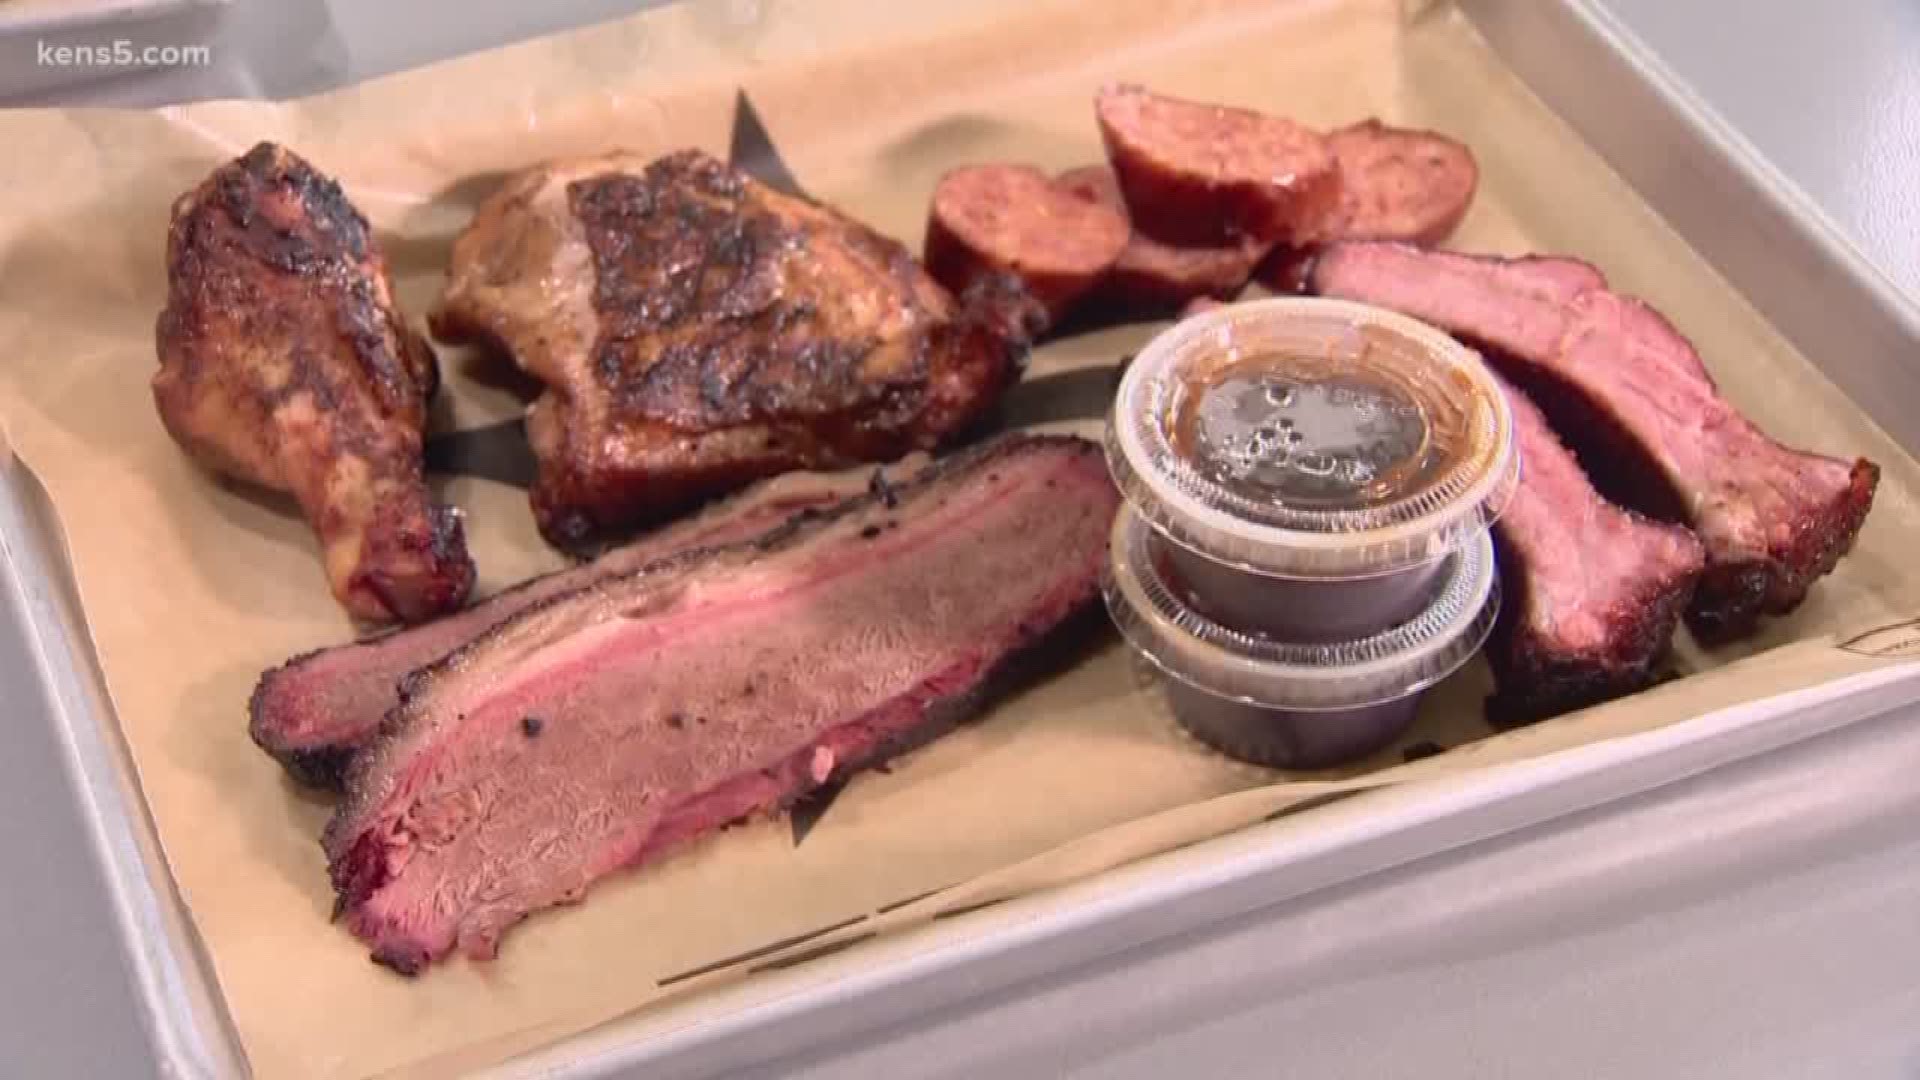 Neighborhood Eats is at Brickyard BBQ this week, sampling some barbecue just in time for Memorial Day weekend.